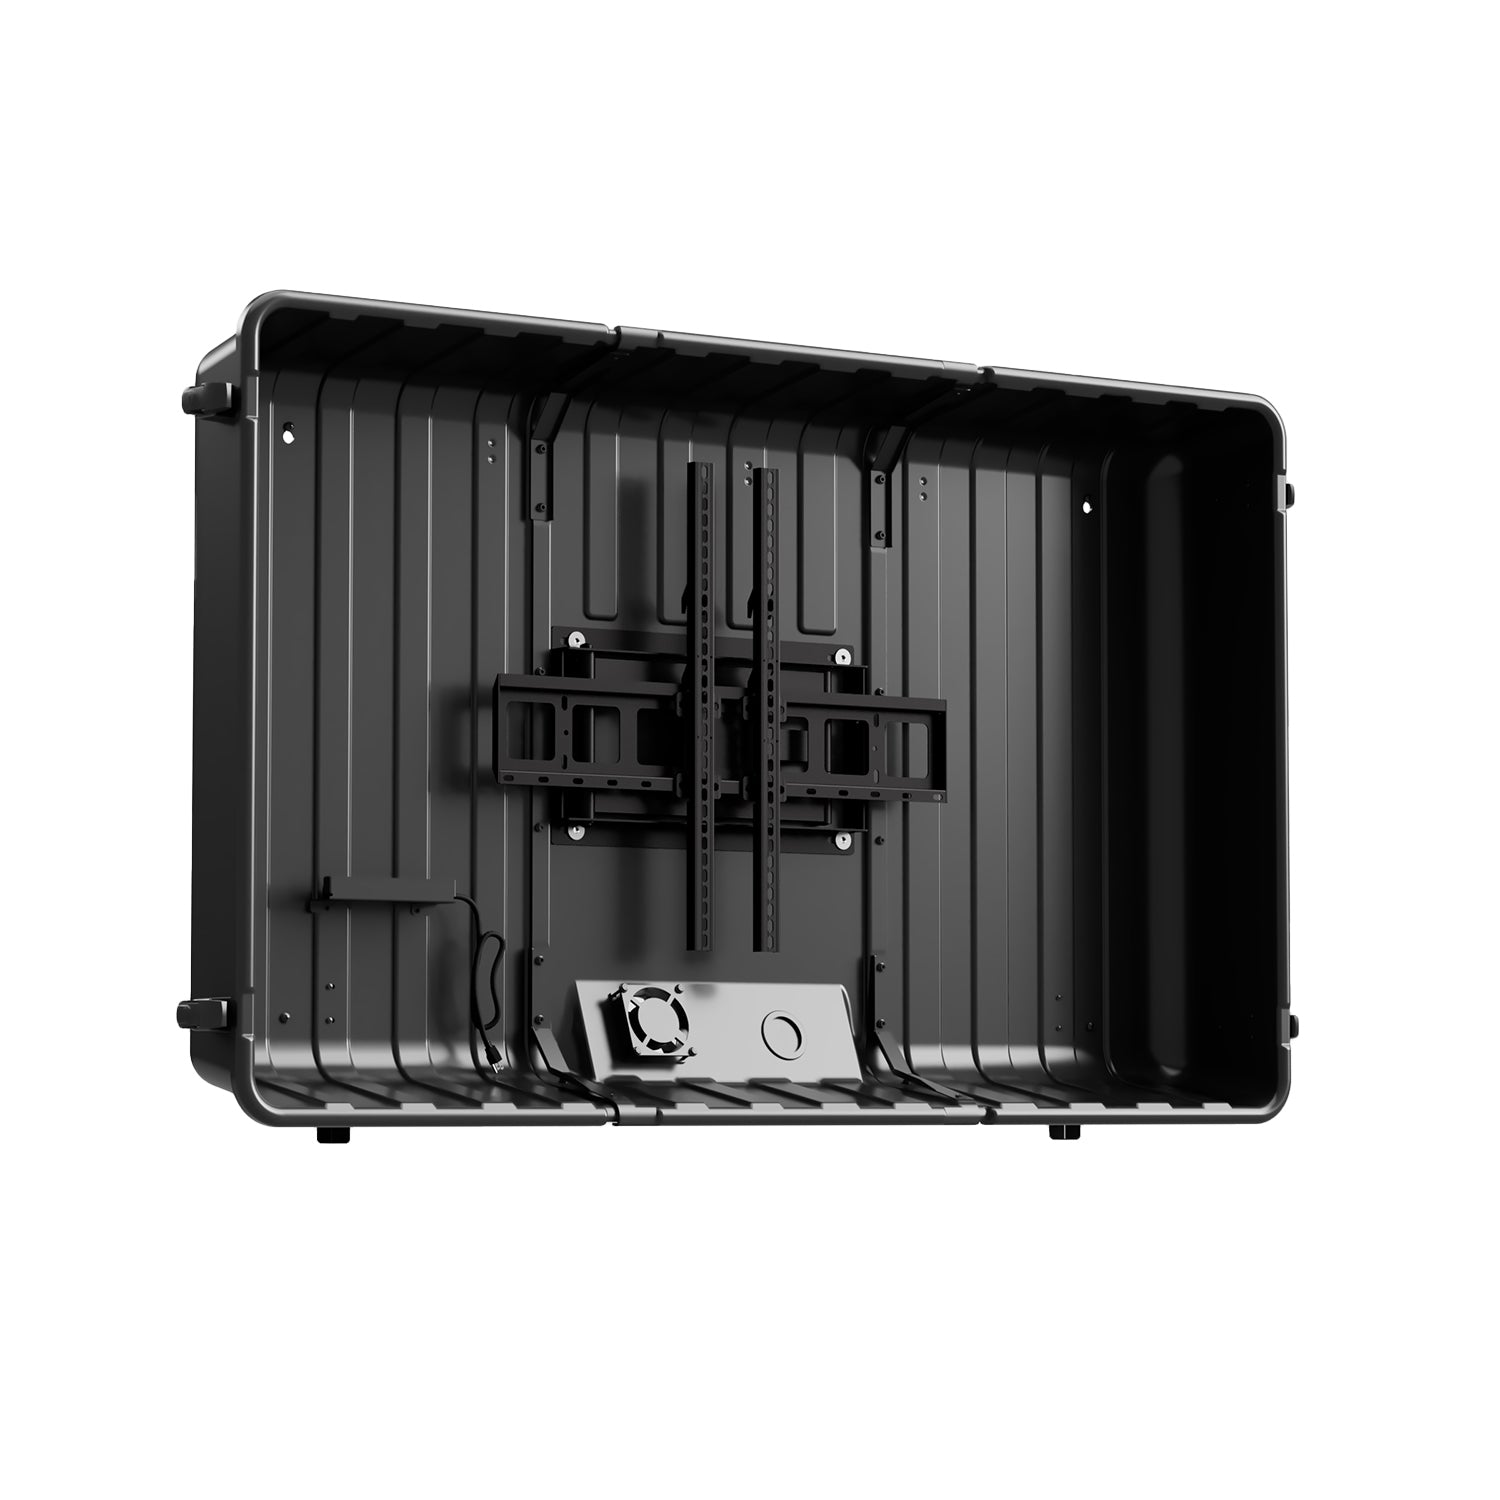 Storm Shell Deluxe Weatherproof 65” Outdoor TV Enclosure, Cooling fan and power strip included with cover removed